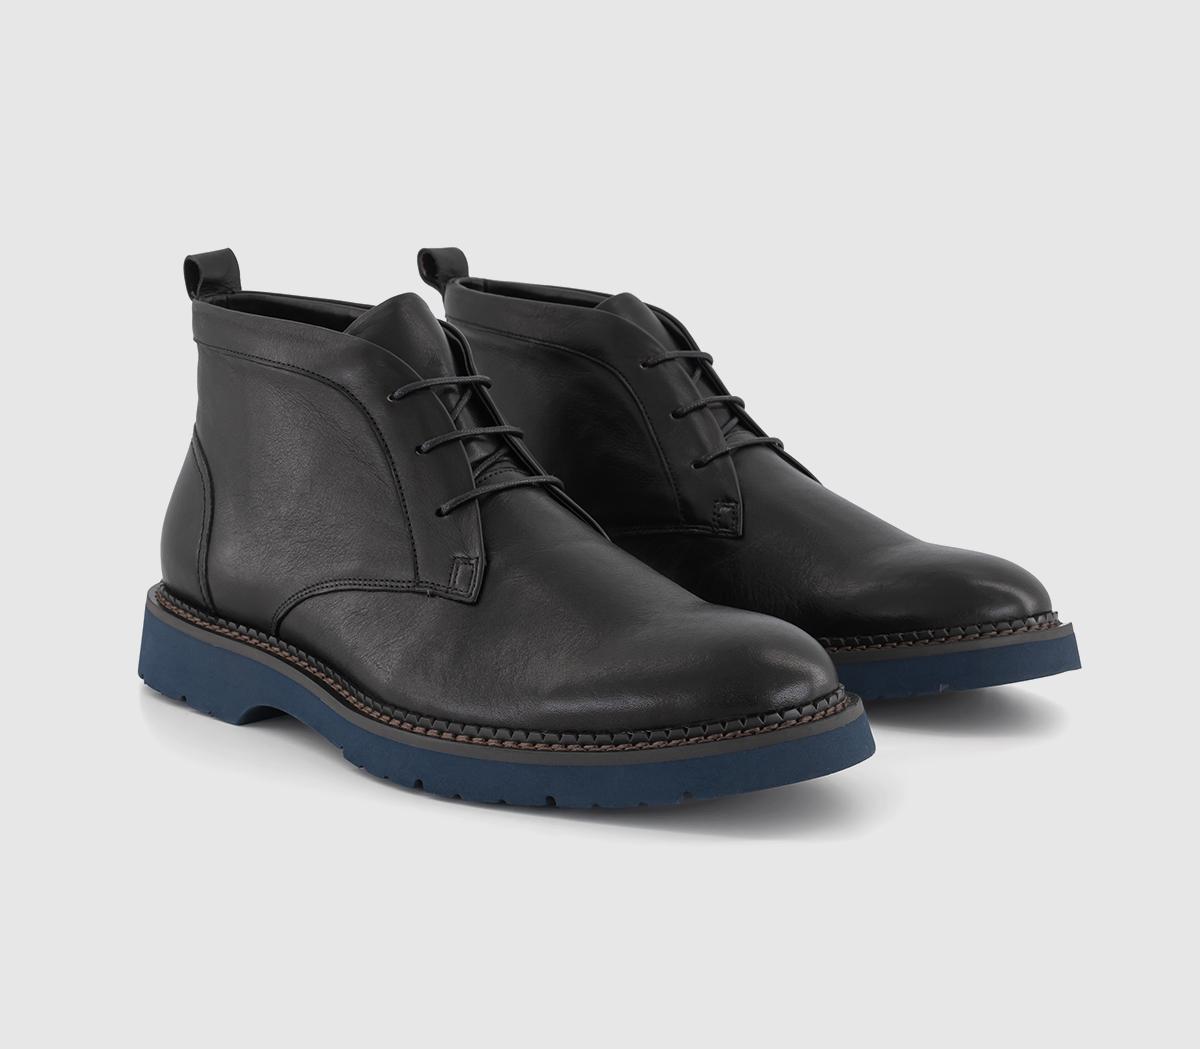 Poste Mens Petersham Contrast Outsole Chukka Boots Black Leather, 9